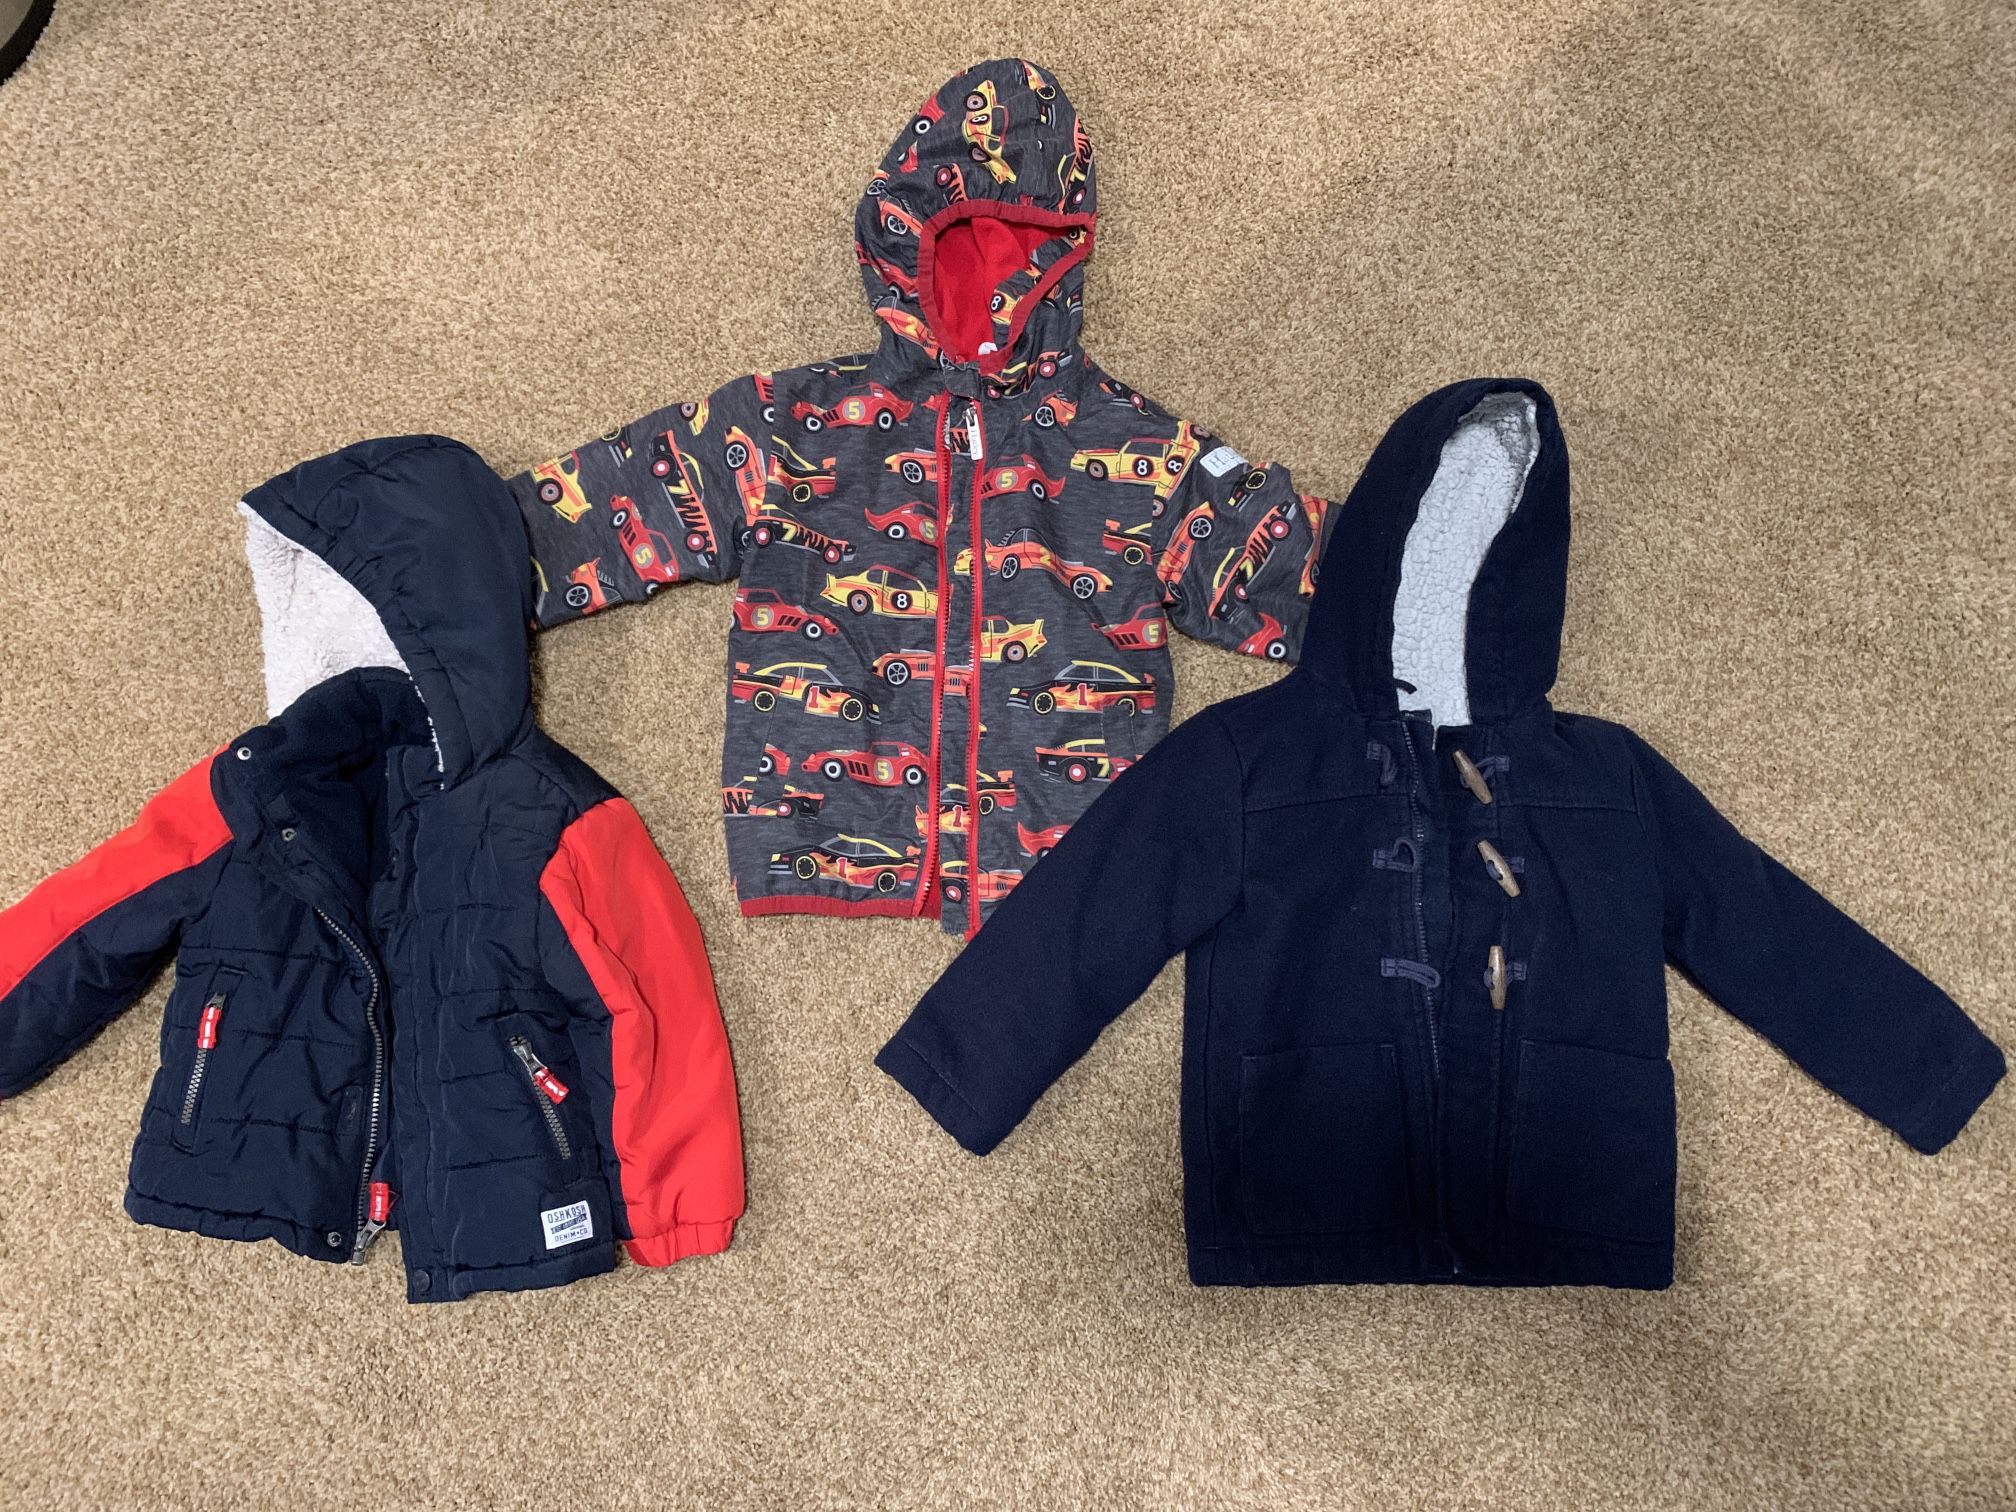 Toddler Jackets 2T-4T - Toddler Raincoat & Toddler Winter Coats (All 3 For Only $50!)